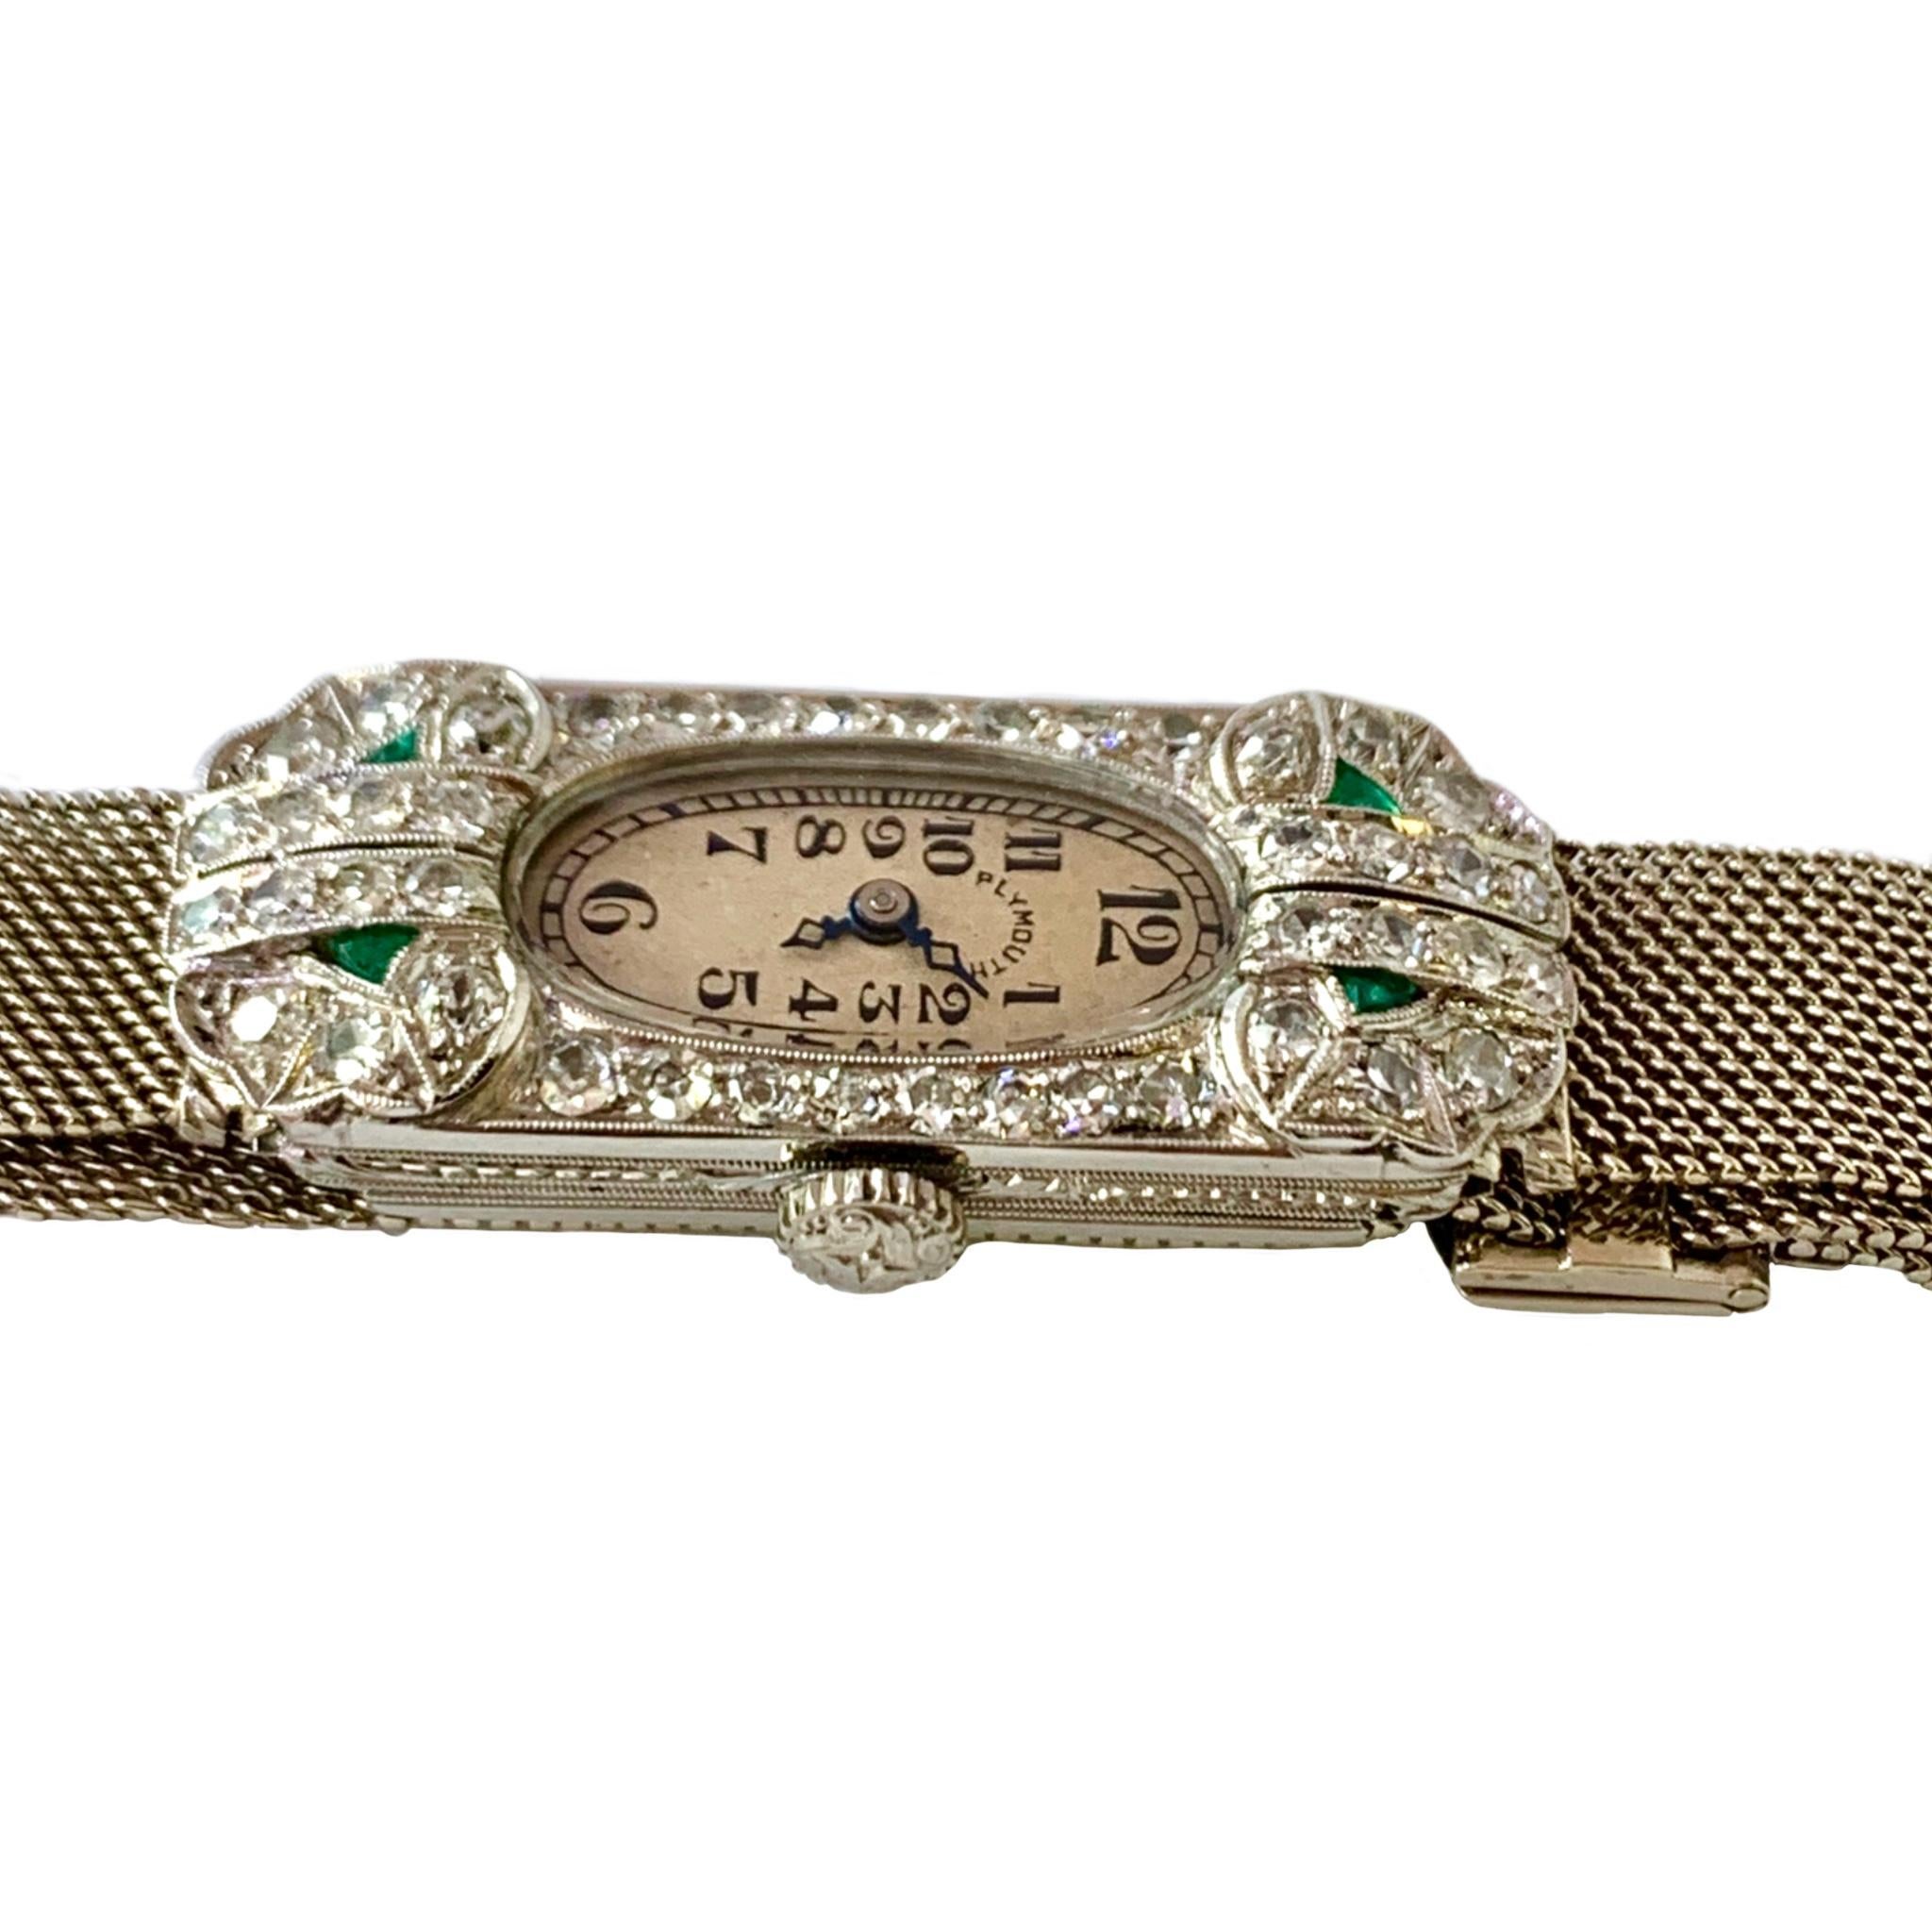 Art deco, circa 1930's Plymouth watch with platinum case and 14K white gold adjustable mesh bracelet set with 44 single cut diamonds total weight approximately 1.32cts and 4 small shield shape emeralds. 